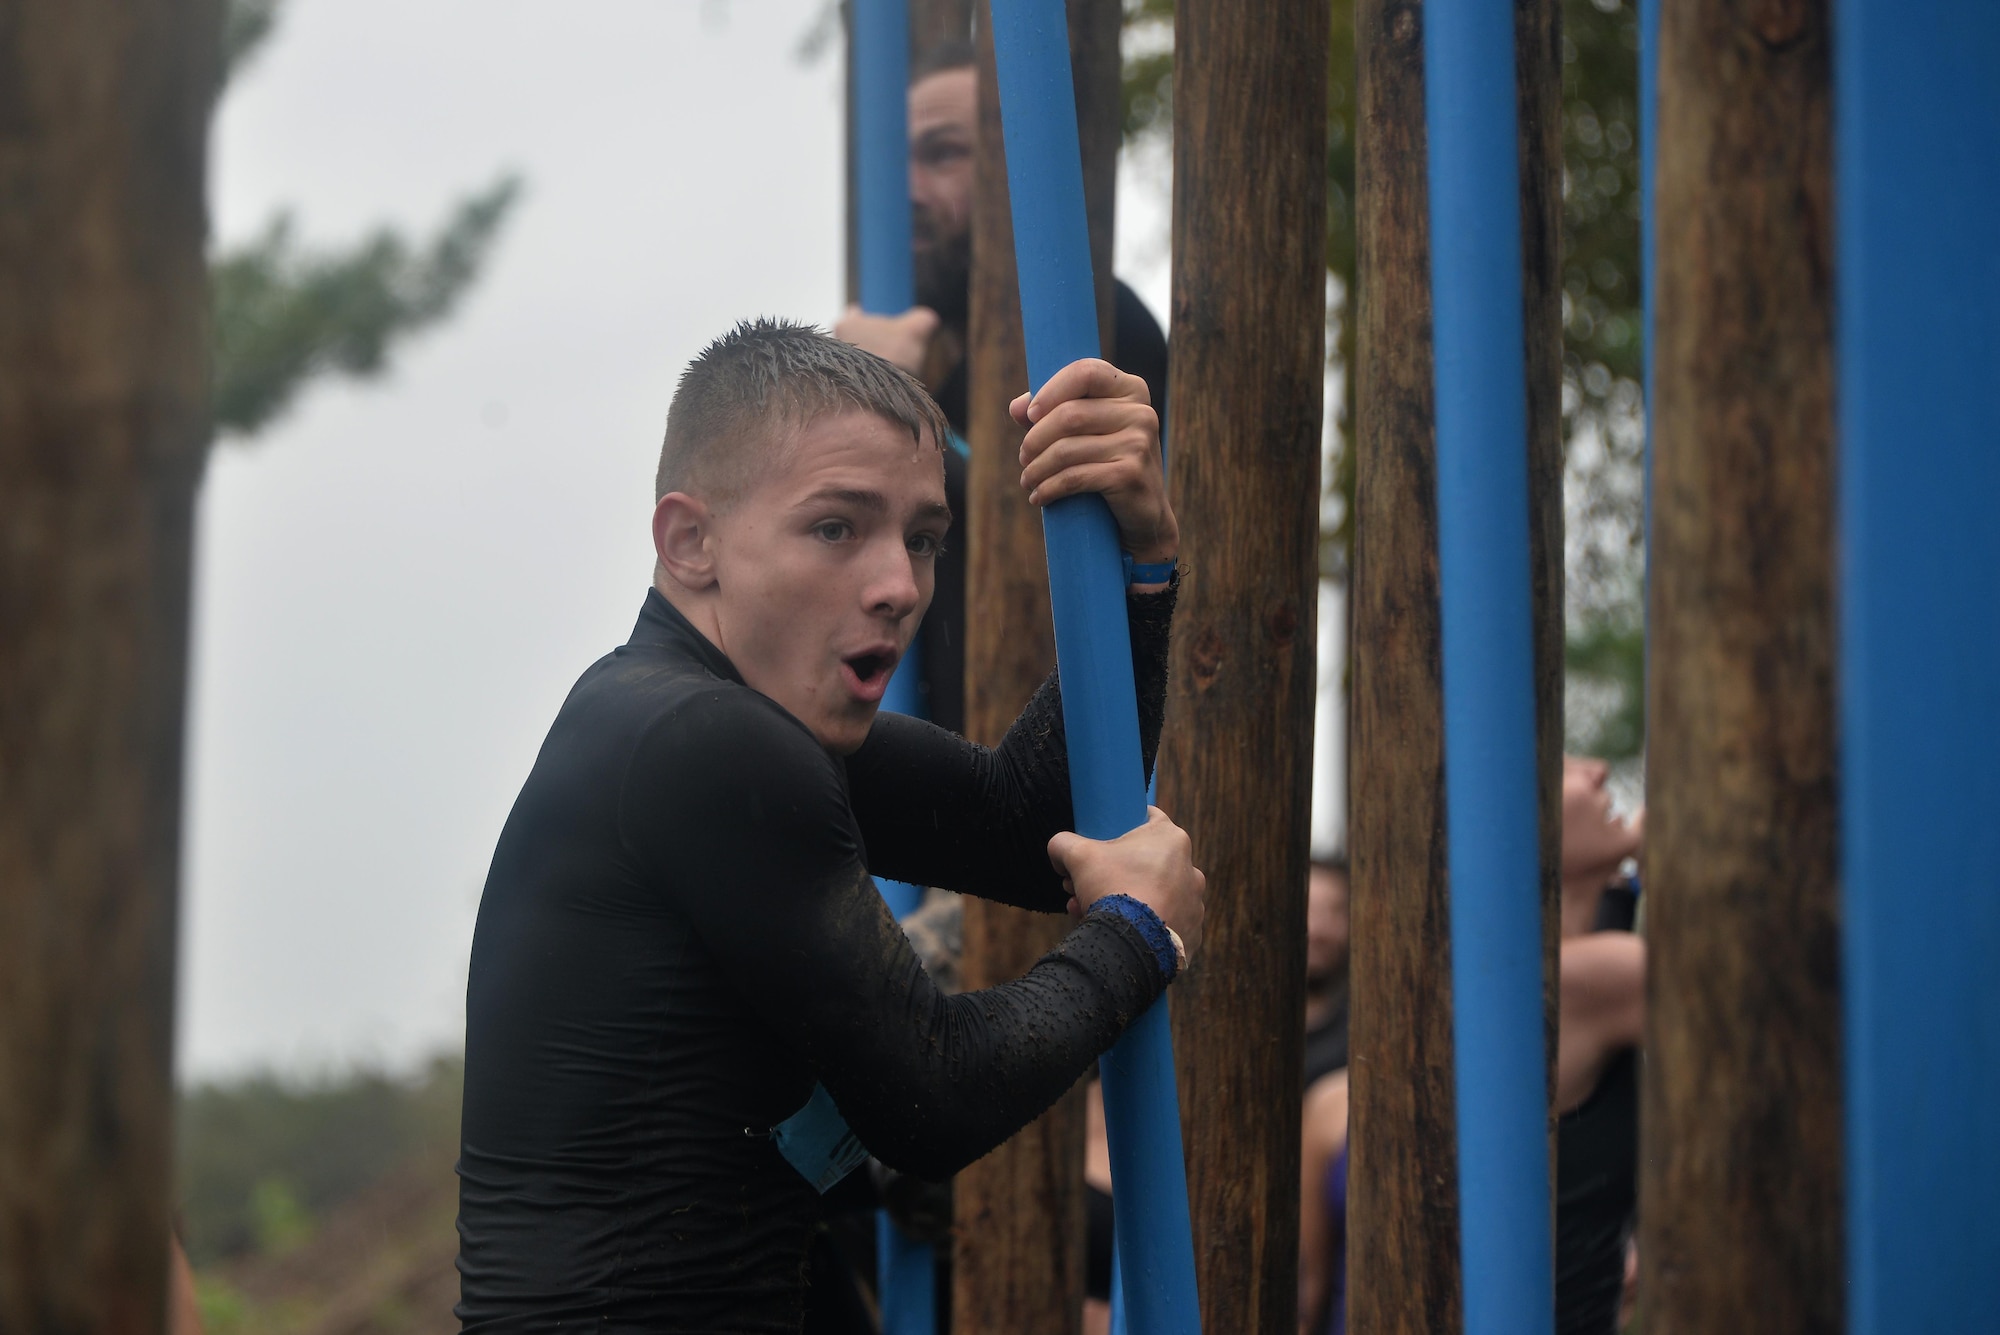 Jackson Hensley calculates how to complete the final obstacle of moving around poles without touching the ground to complete the 2016 Savage Race October 8, 2016 at Kennedyville, Md. 70th ISRW participants endured a seven-mile obstacle course of cargo net walls, creeks, ice cold water and climbing to test their stamina and strength as a team. (U.S. Air Force photo/Staff Sgt. Alexandre Montes)